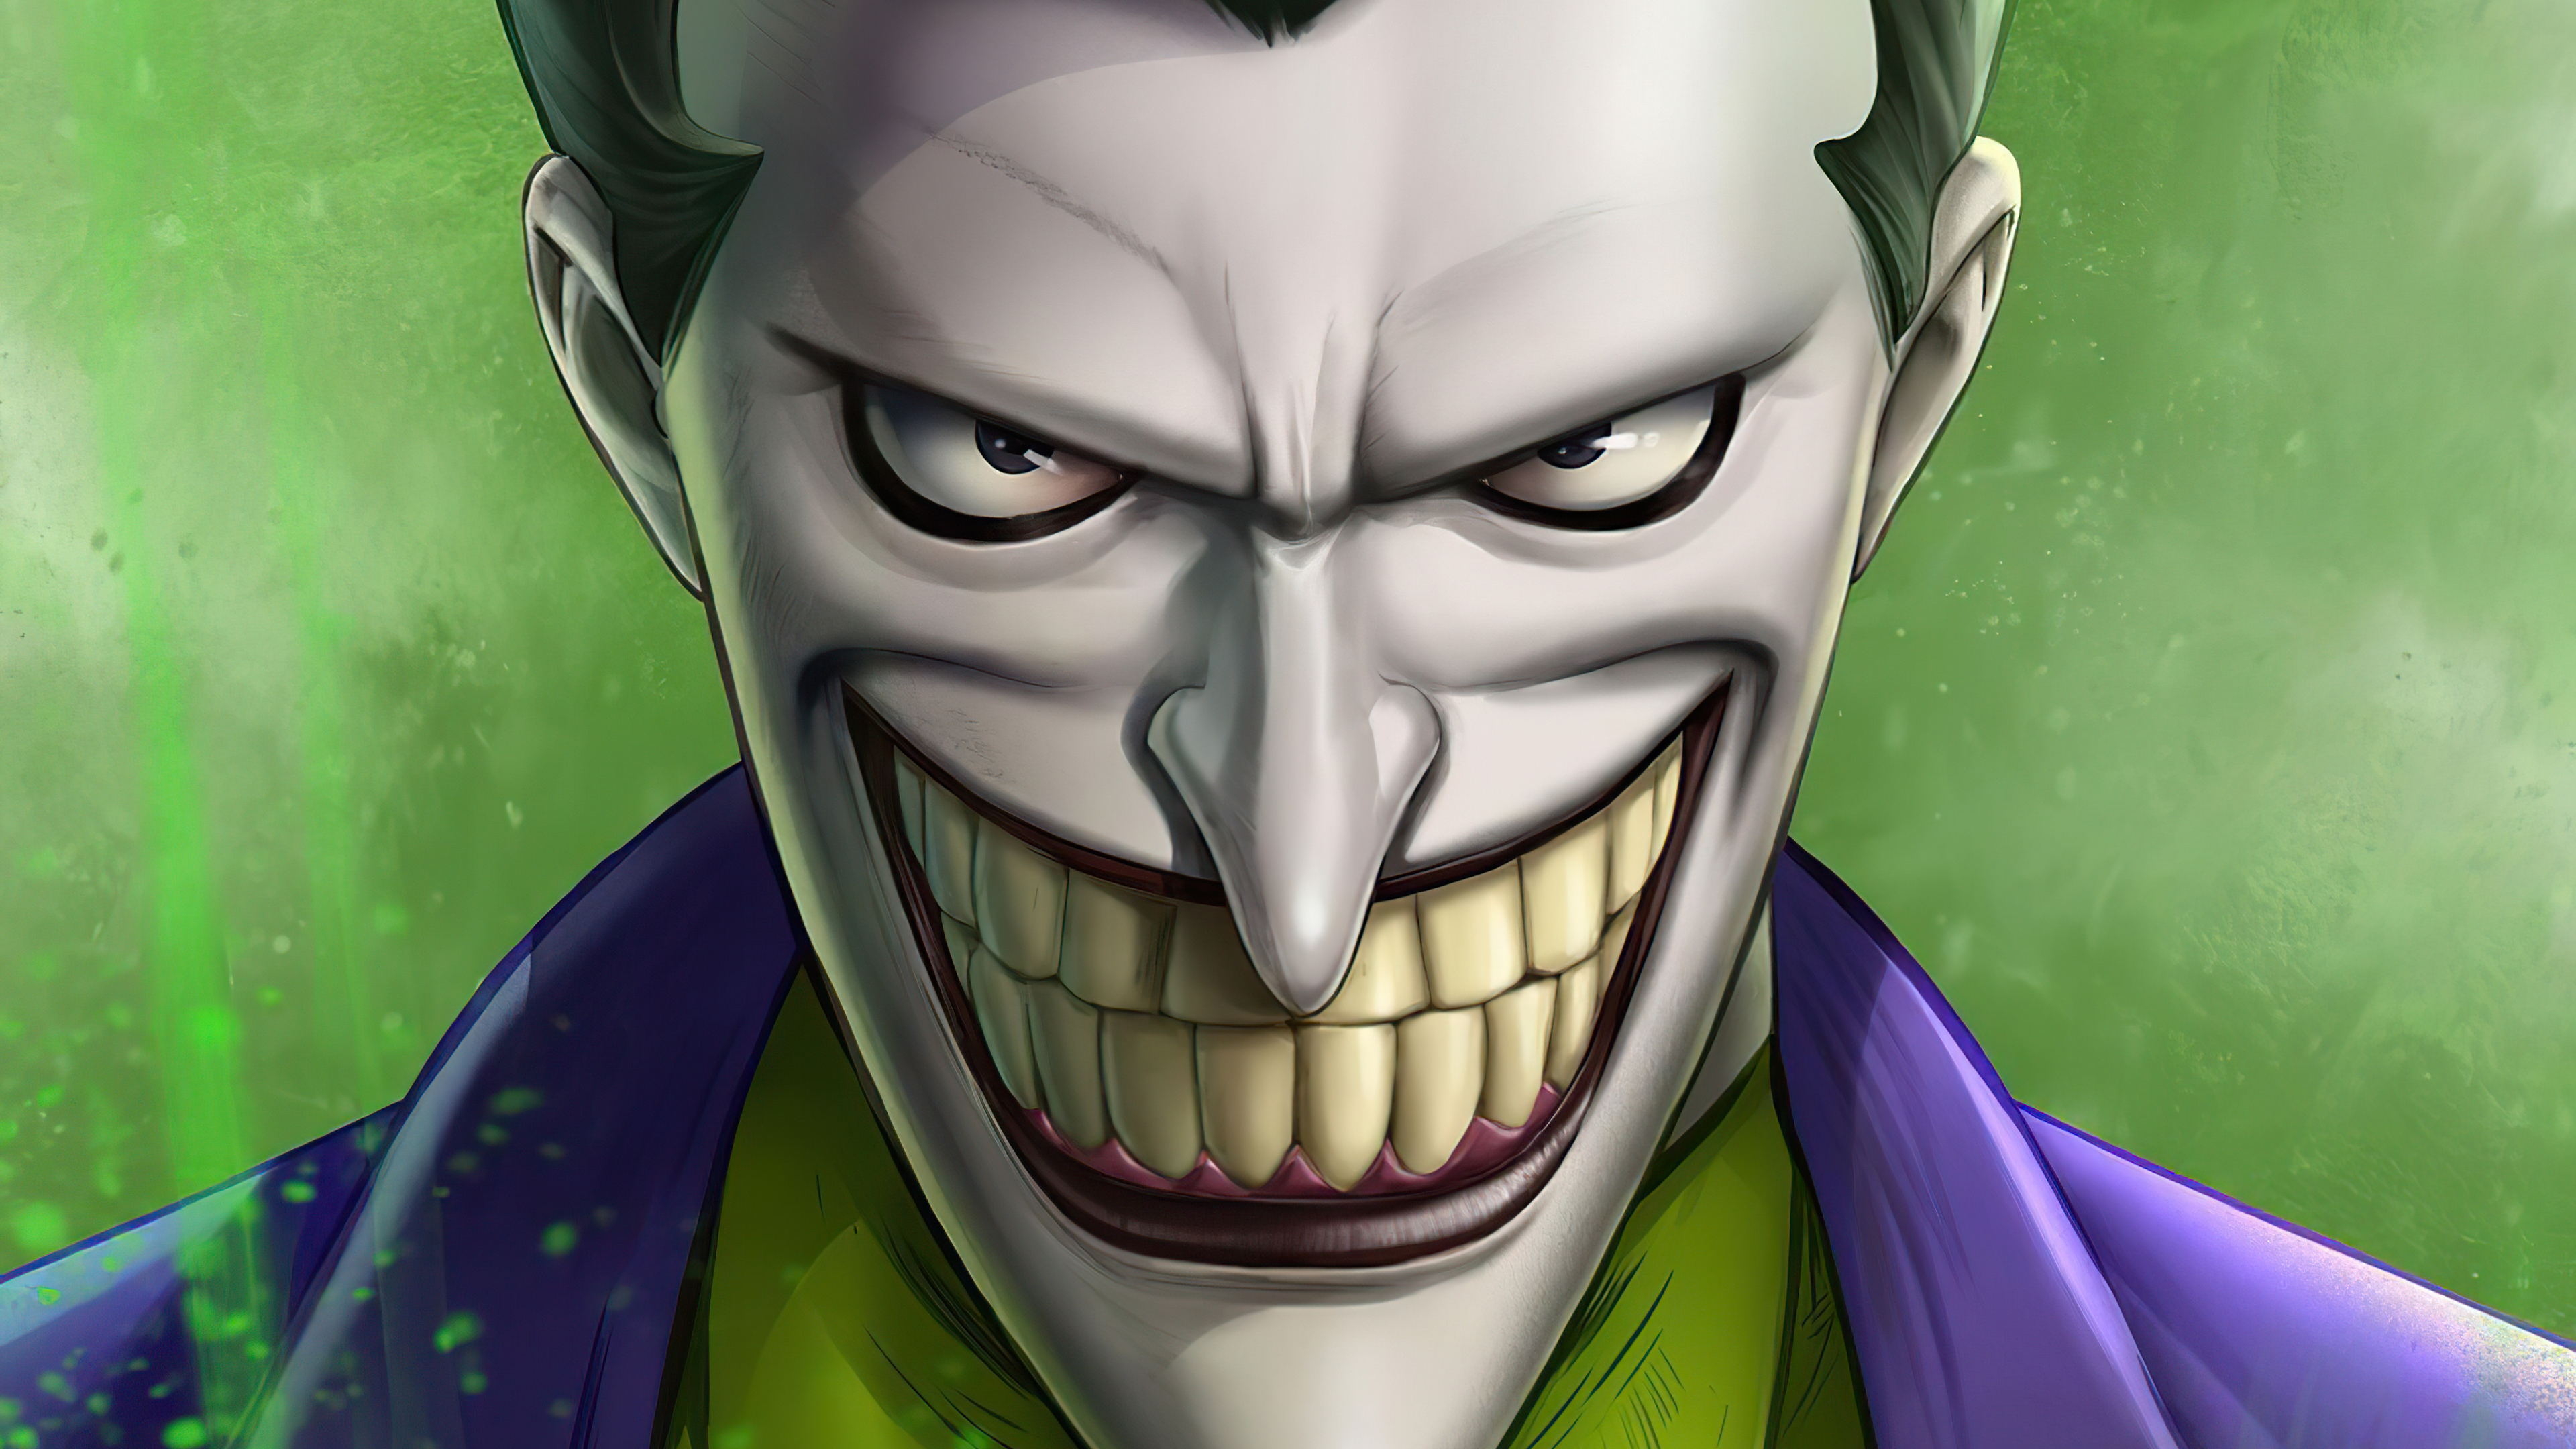 Download The Joker brings chaos and destruction to the city Wallpaper   Wallpaperscom